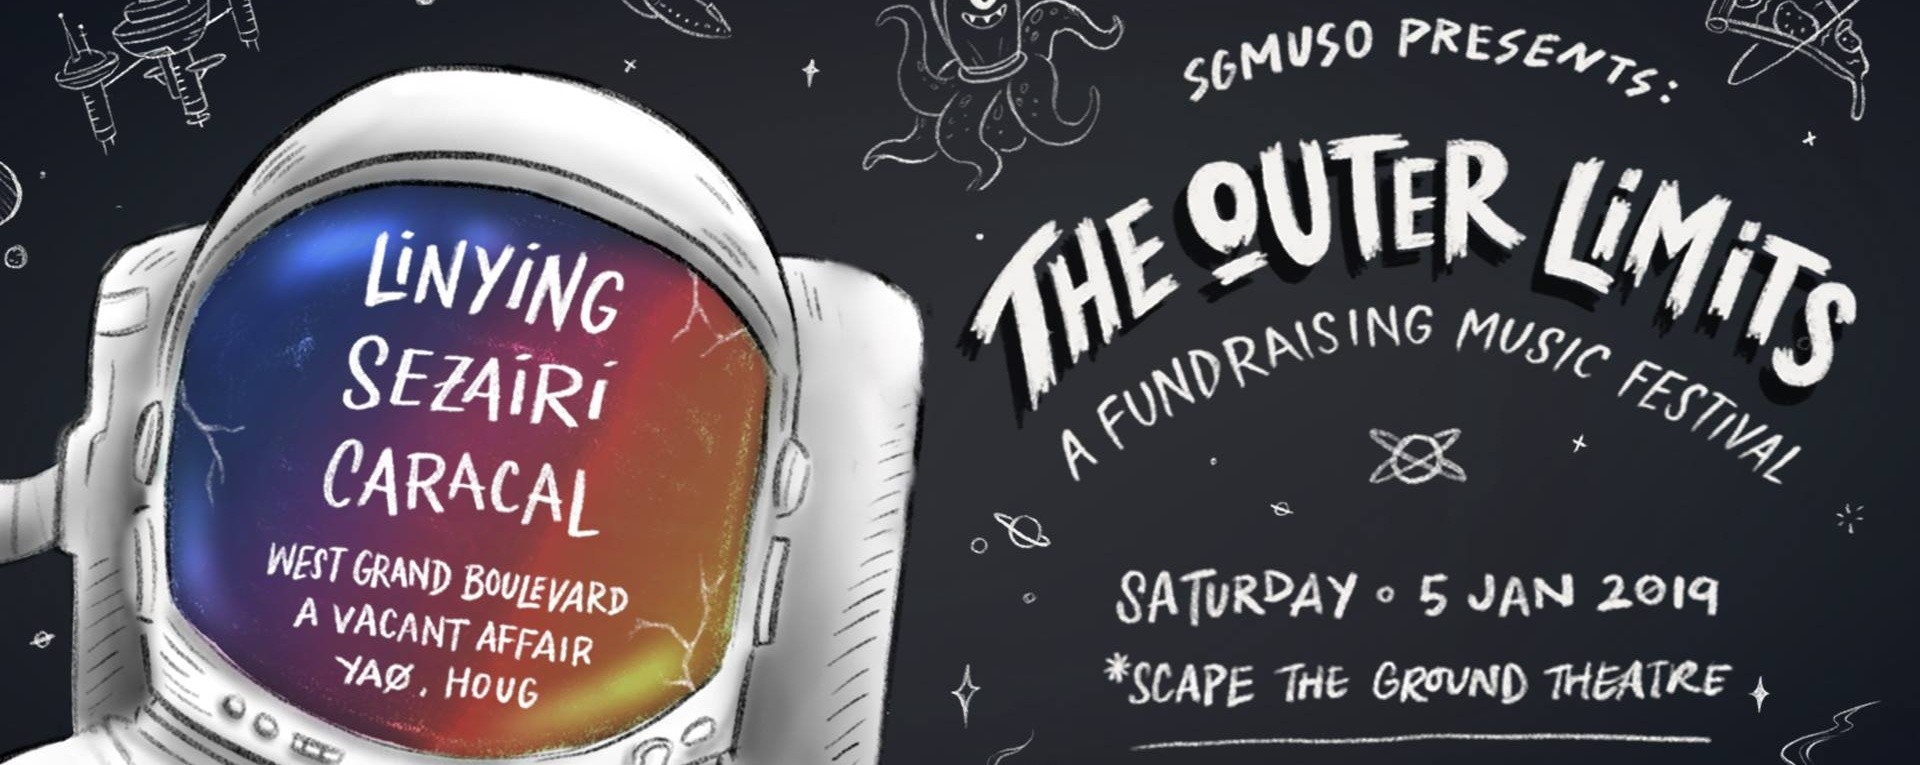 The Outer Limits (A Fundraising Music Festival)